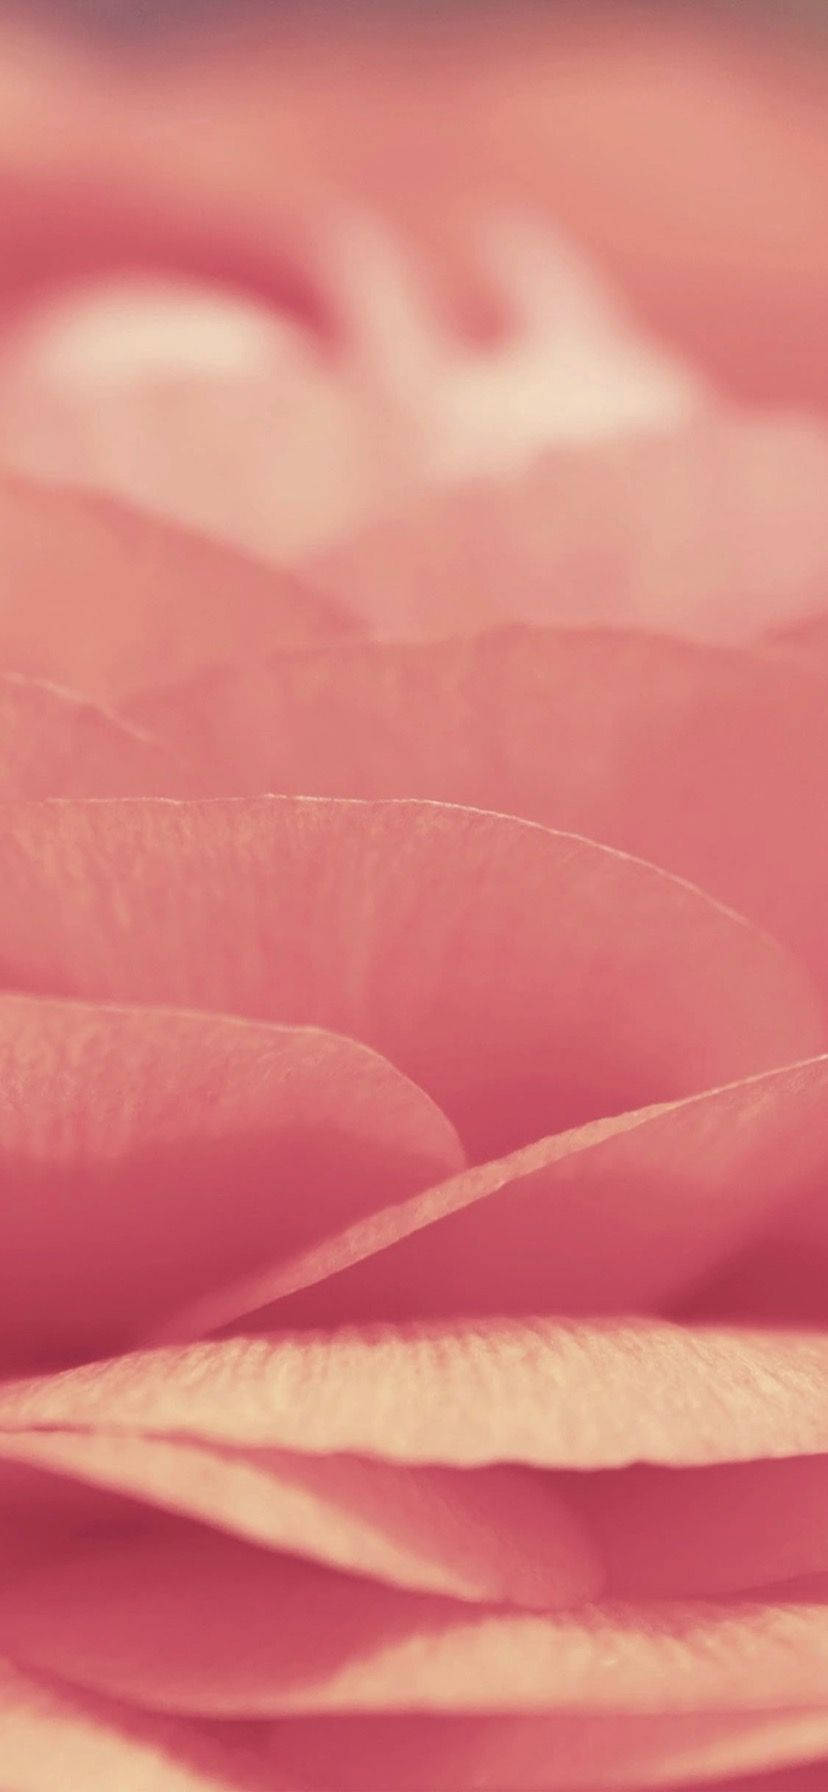 Delicate Pink Petals on the iPhone XR Wallpaper